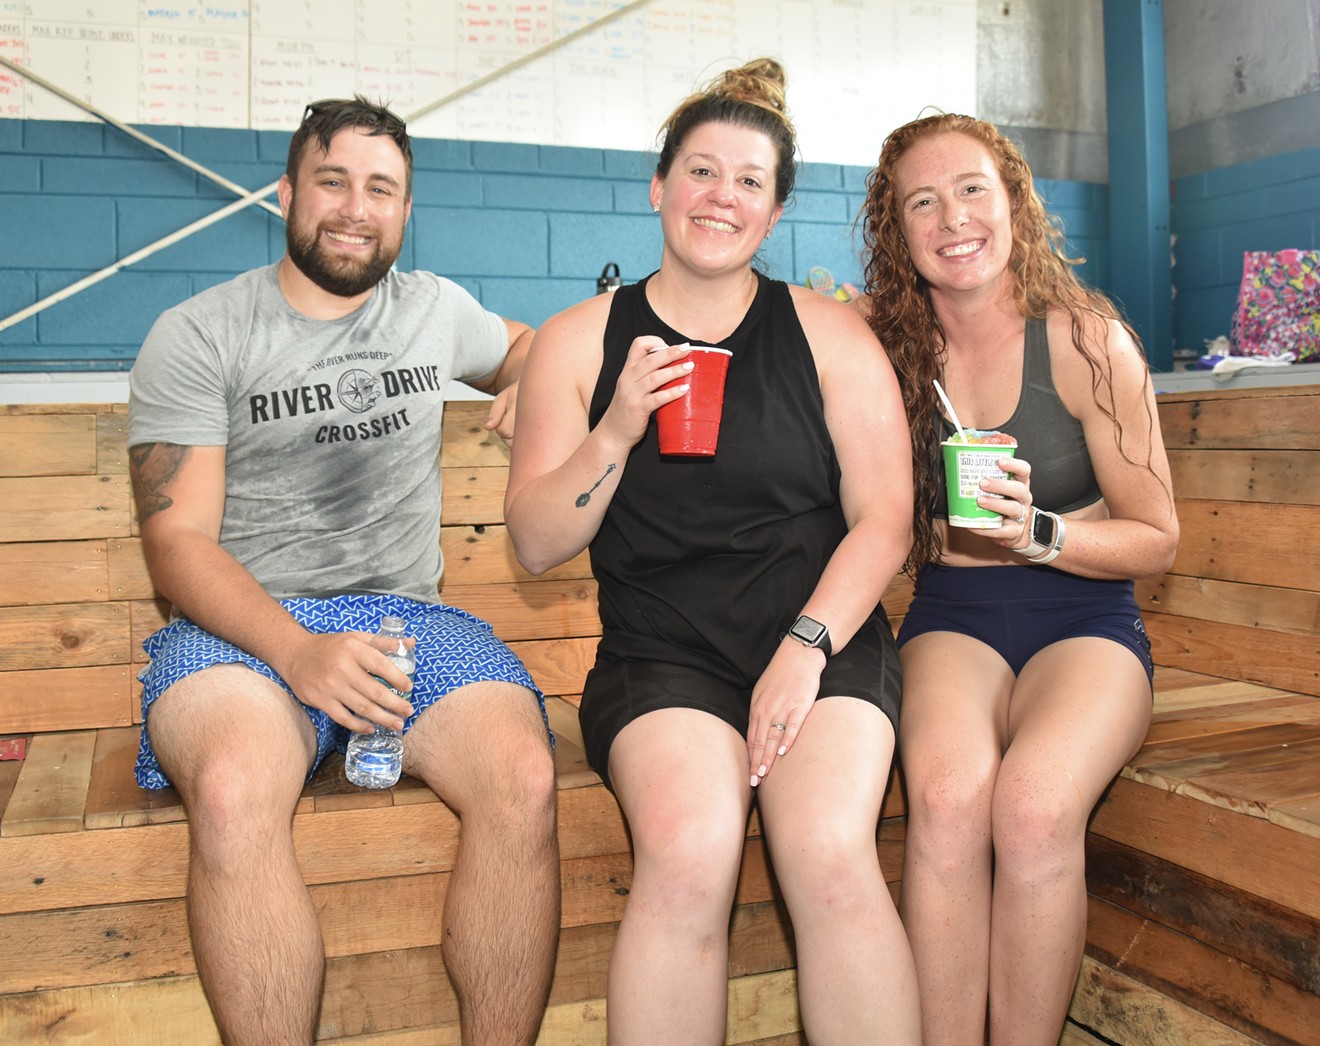 River Drive CrossFit 2 Year Anniversary Party